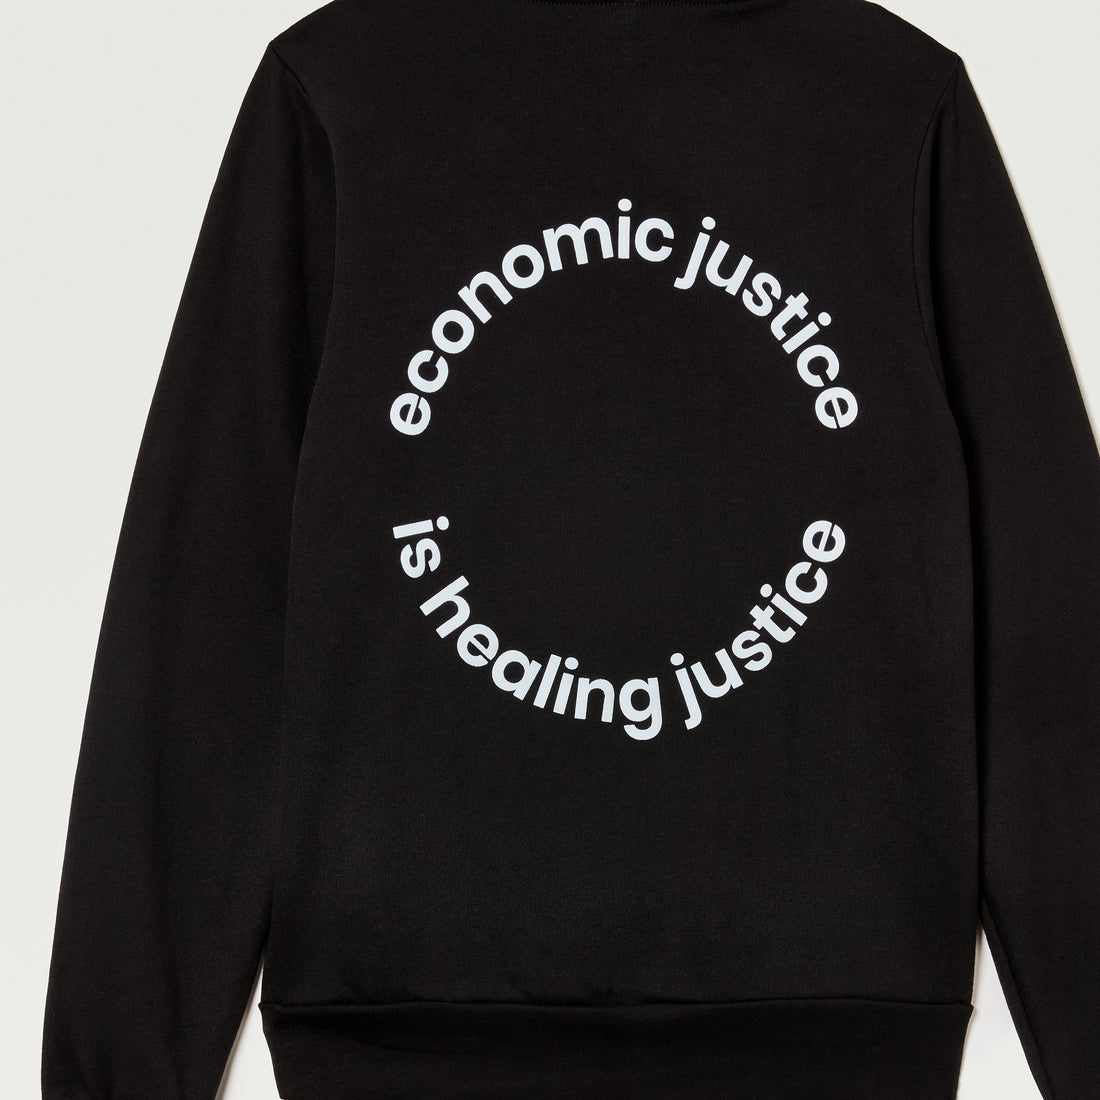 Economic Justice is Healing Justice Sweatshirt by GIFTED